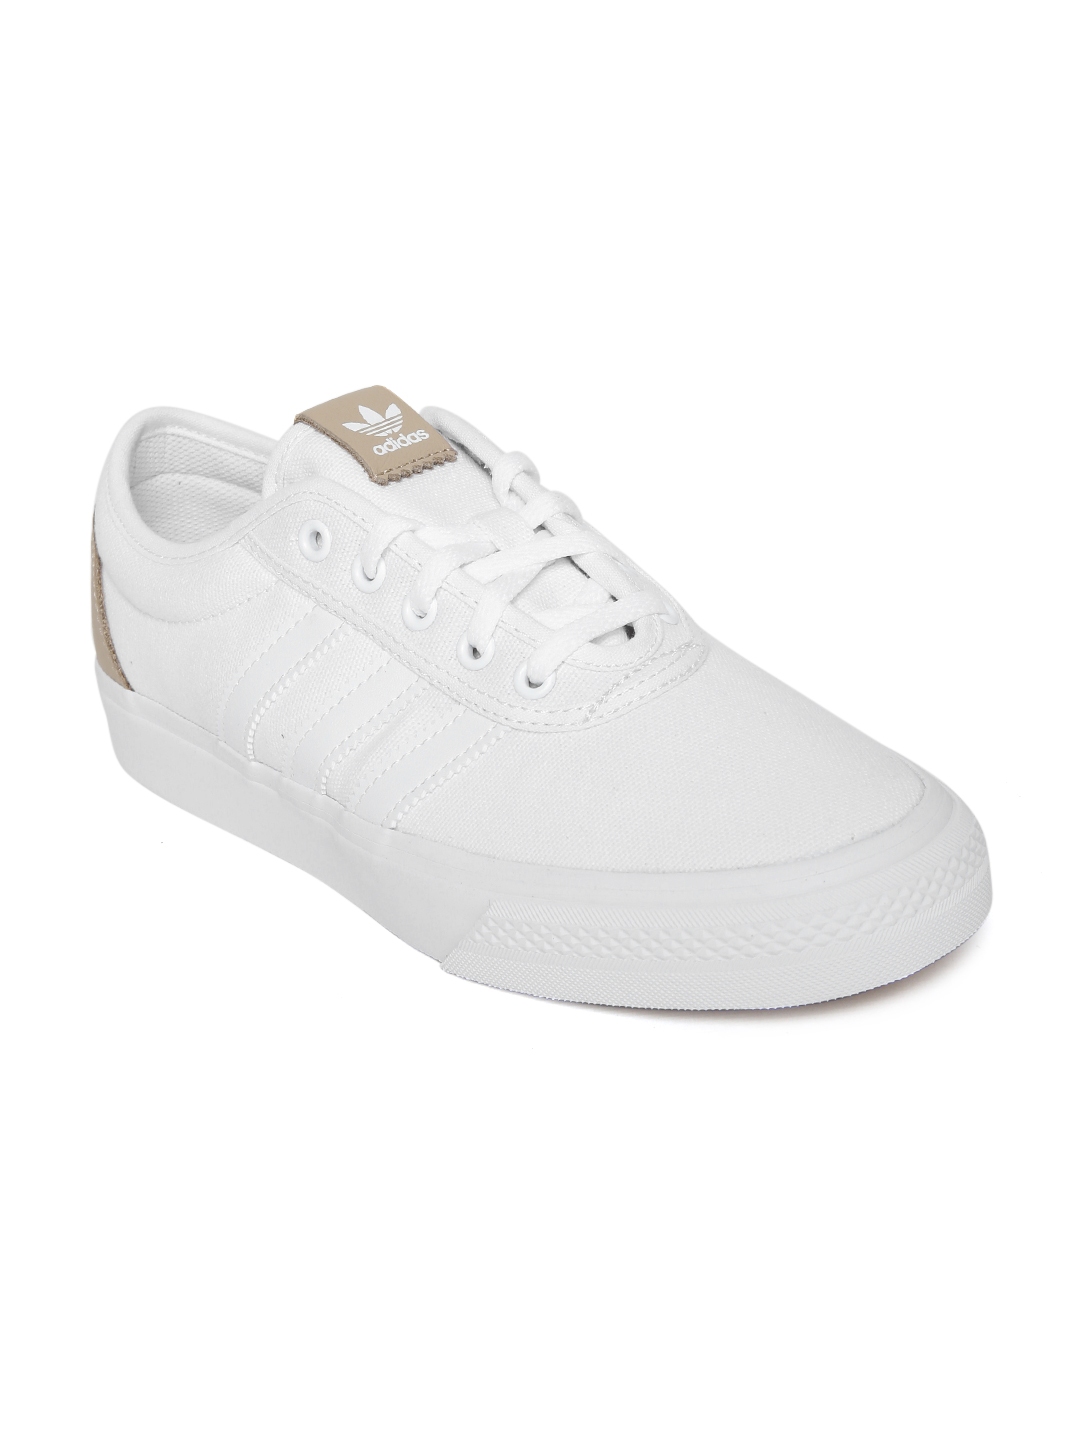 Buy ADIDAS Originals Women White Adiease Sports Shoes - Casual Shoes ...